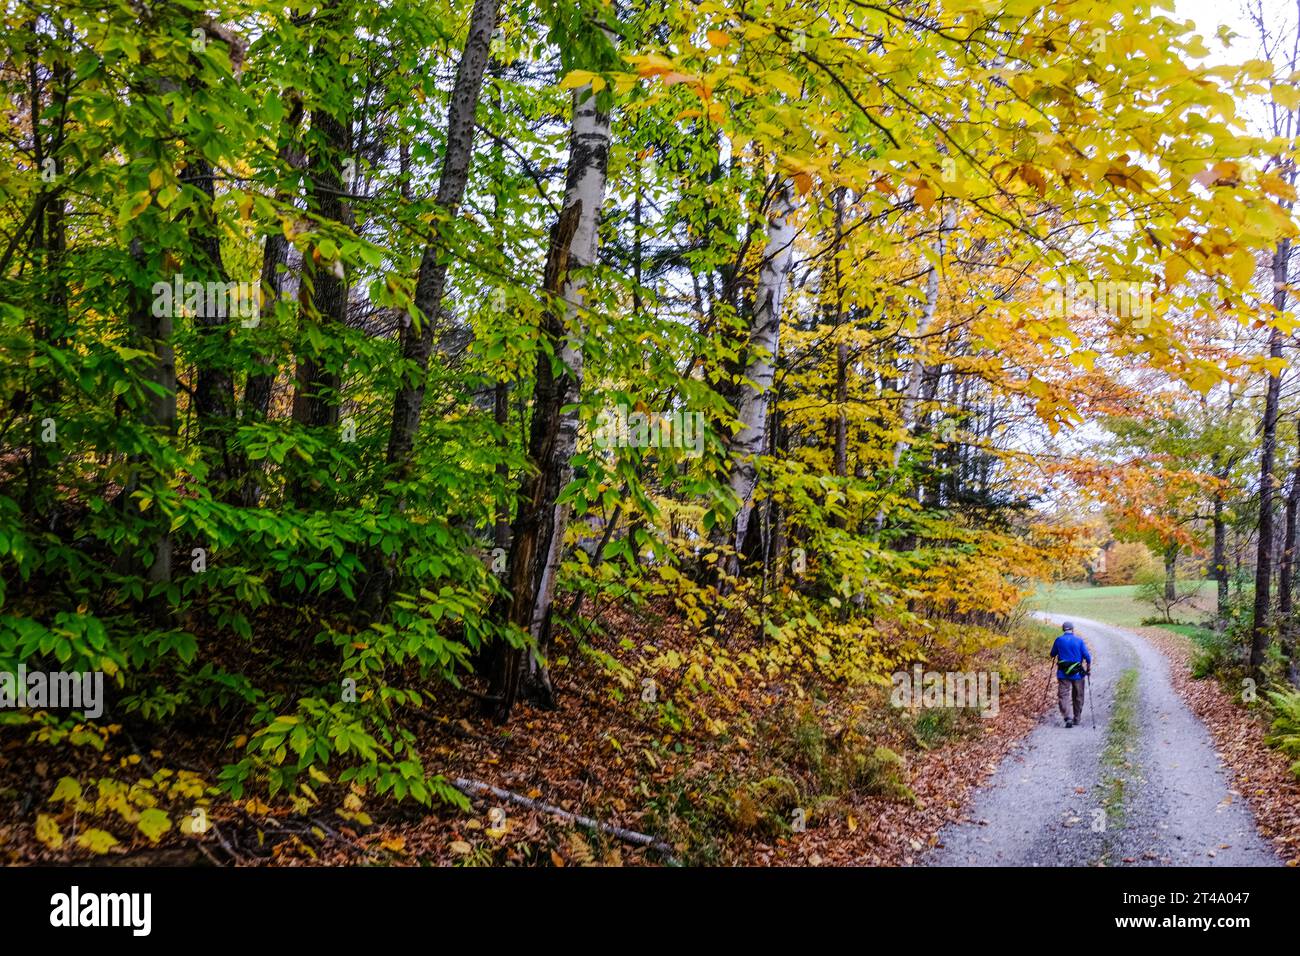 An older person walks along a country road in Vermont near colorful fall foliage using ski poles to walk with. Stock Photo